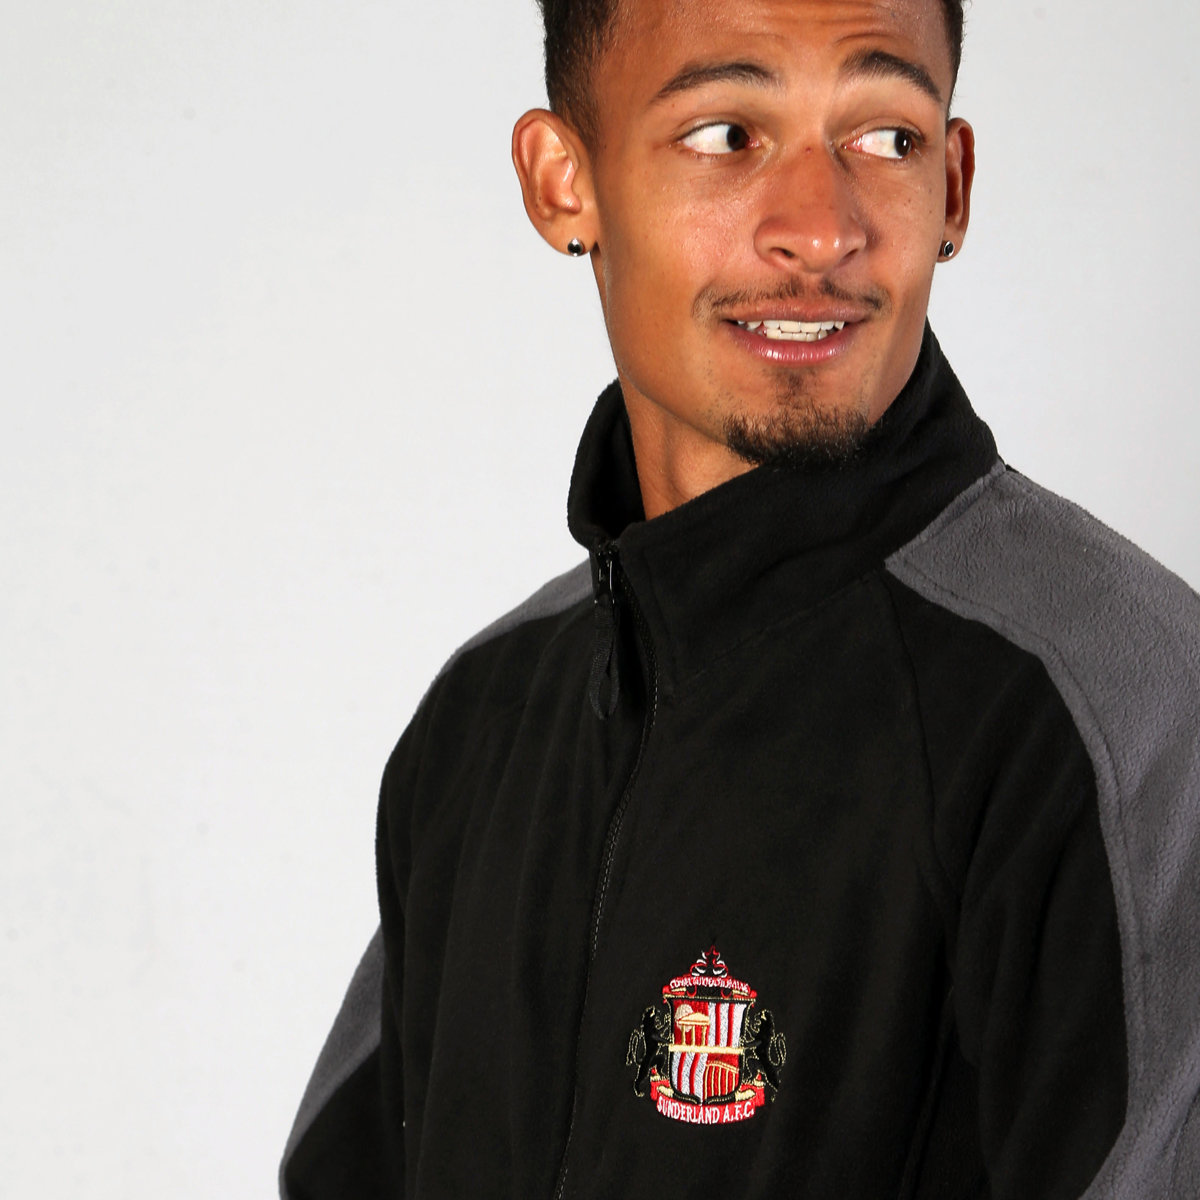 Buy the SAFC Two Tone Fleece online at Sunderland AFC Store